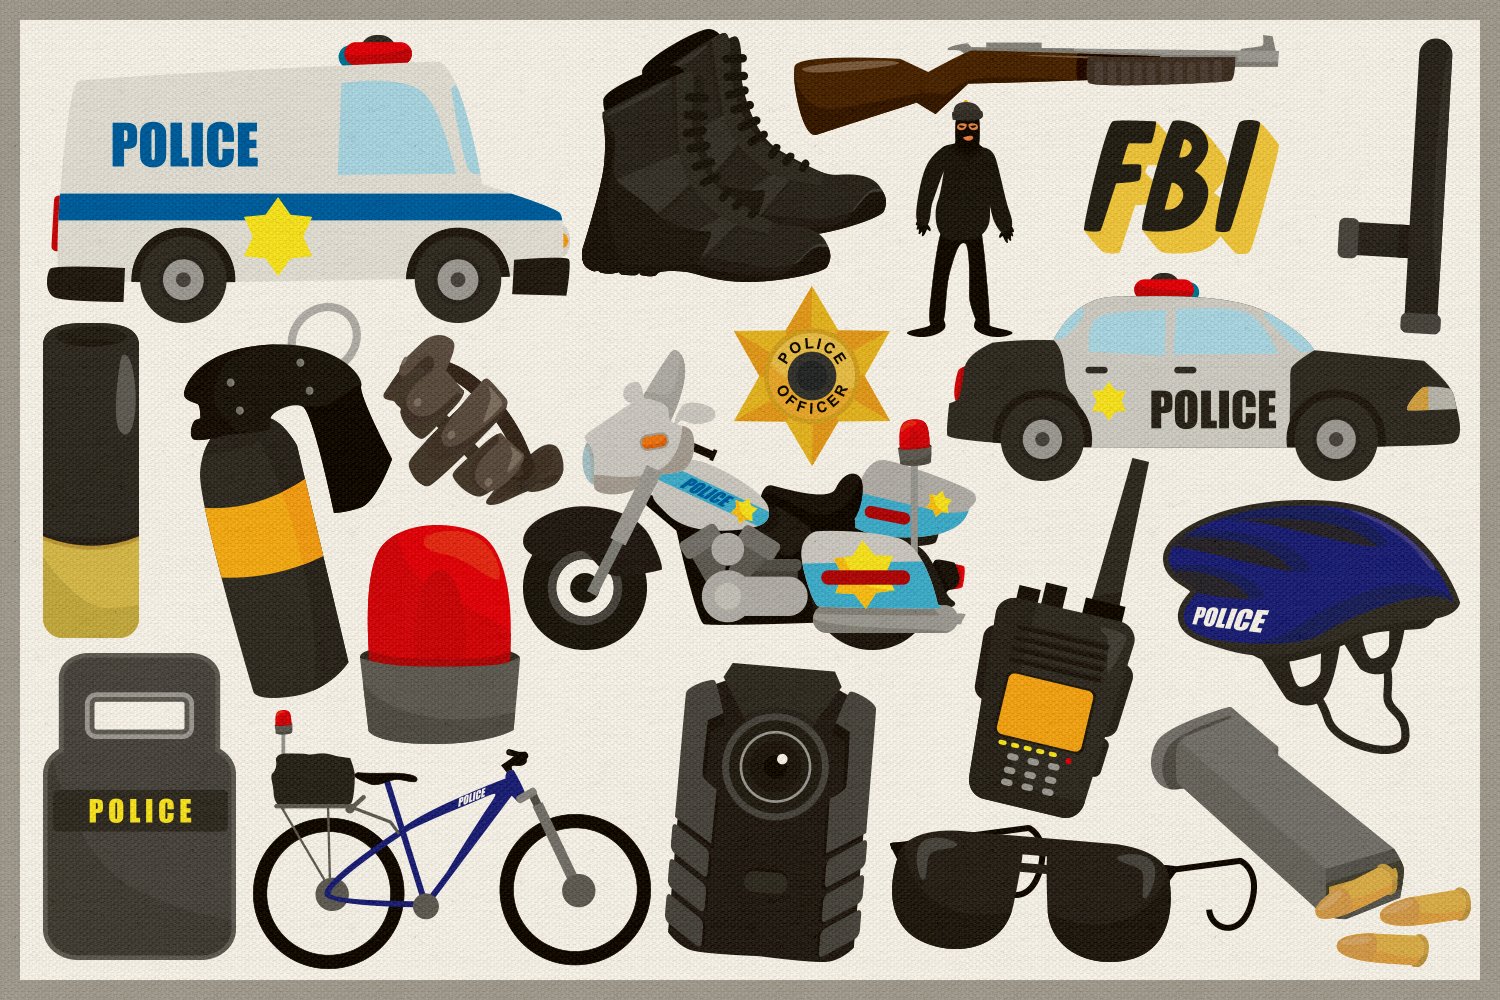 Images of a baton, a gun, a helmet, a walkie-talkie, glasses, a signaling device, a police moped, 2 police cars, boots, a robber, a bicycle and others.